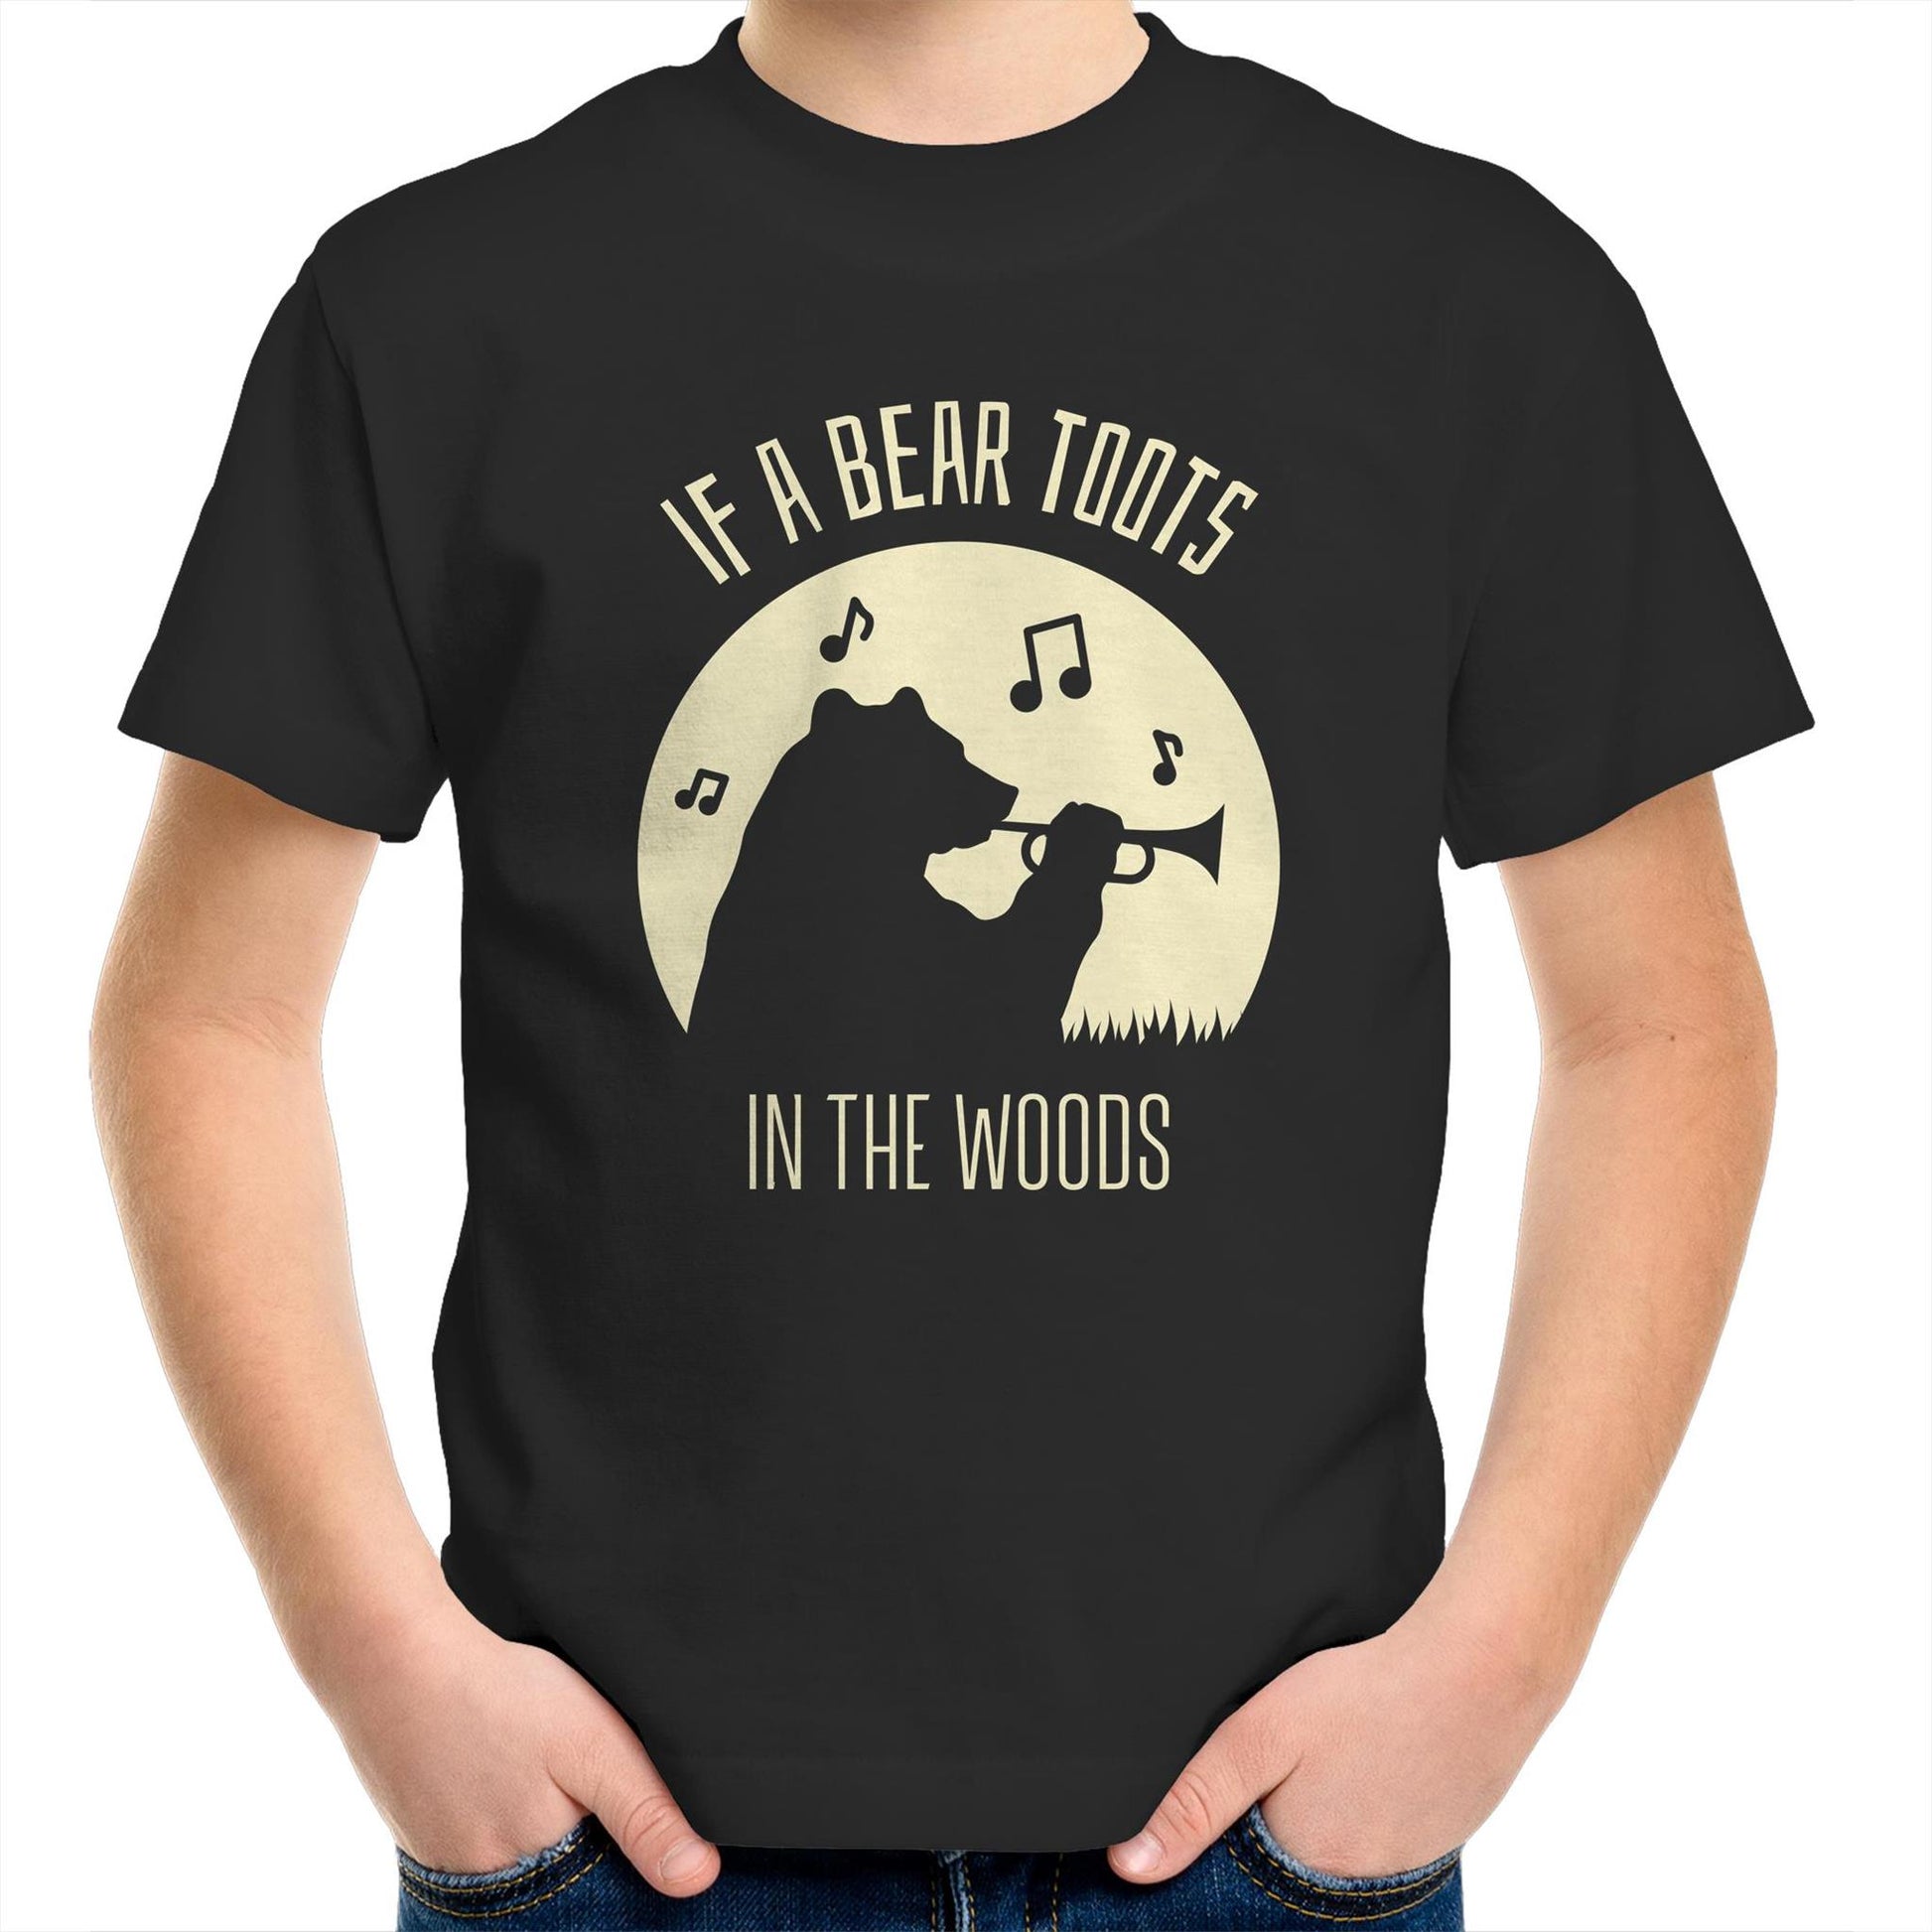 If A Bear Toots In The Woods, Trumpet Player - Kids Youth T-Shirt Black Kids Youth T-shirt animal Music